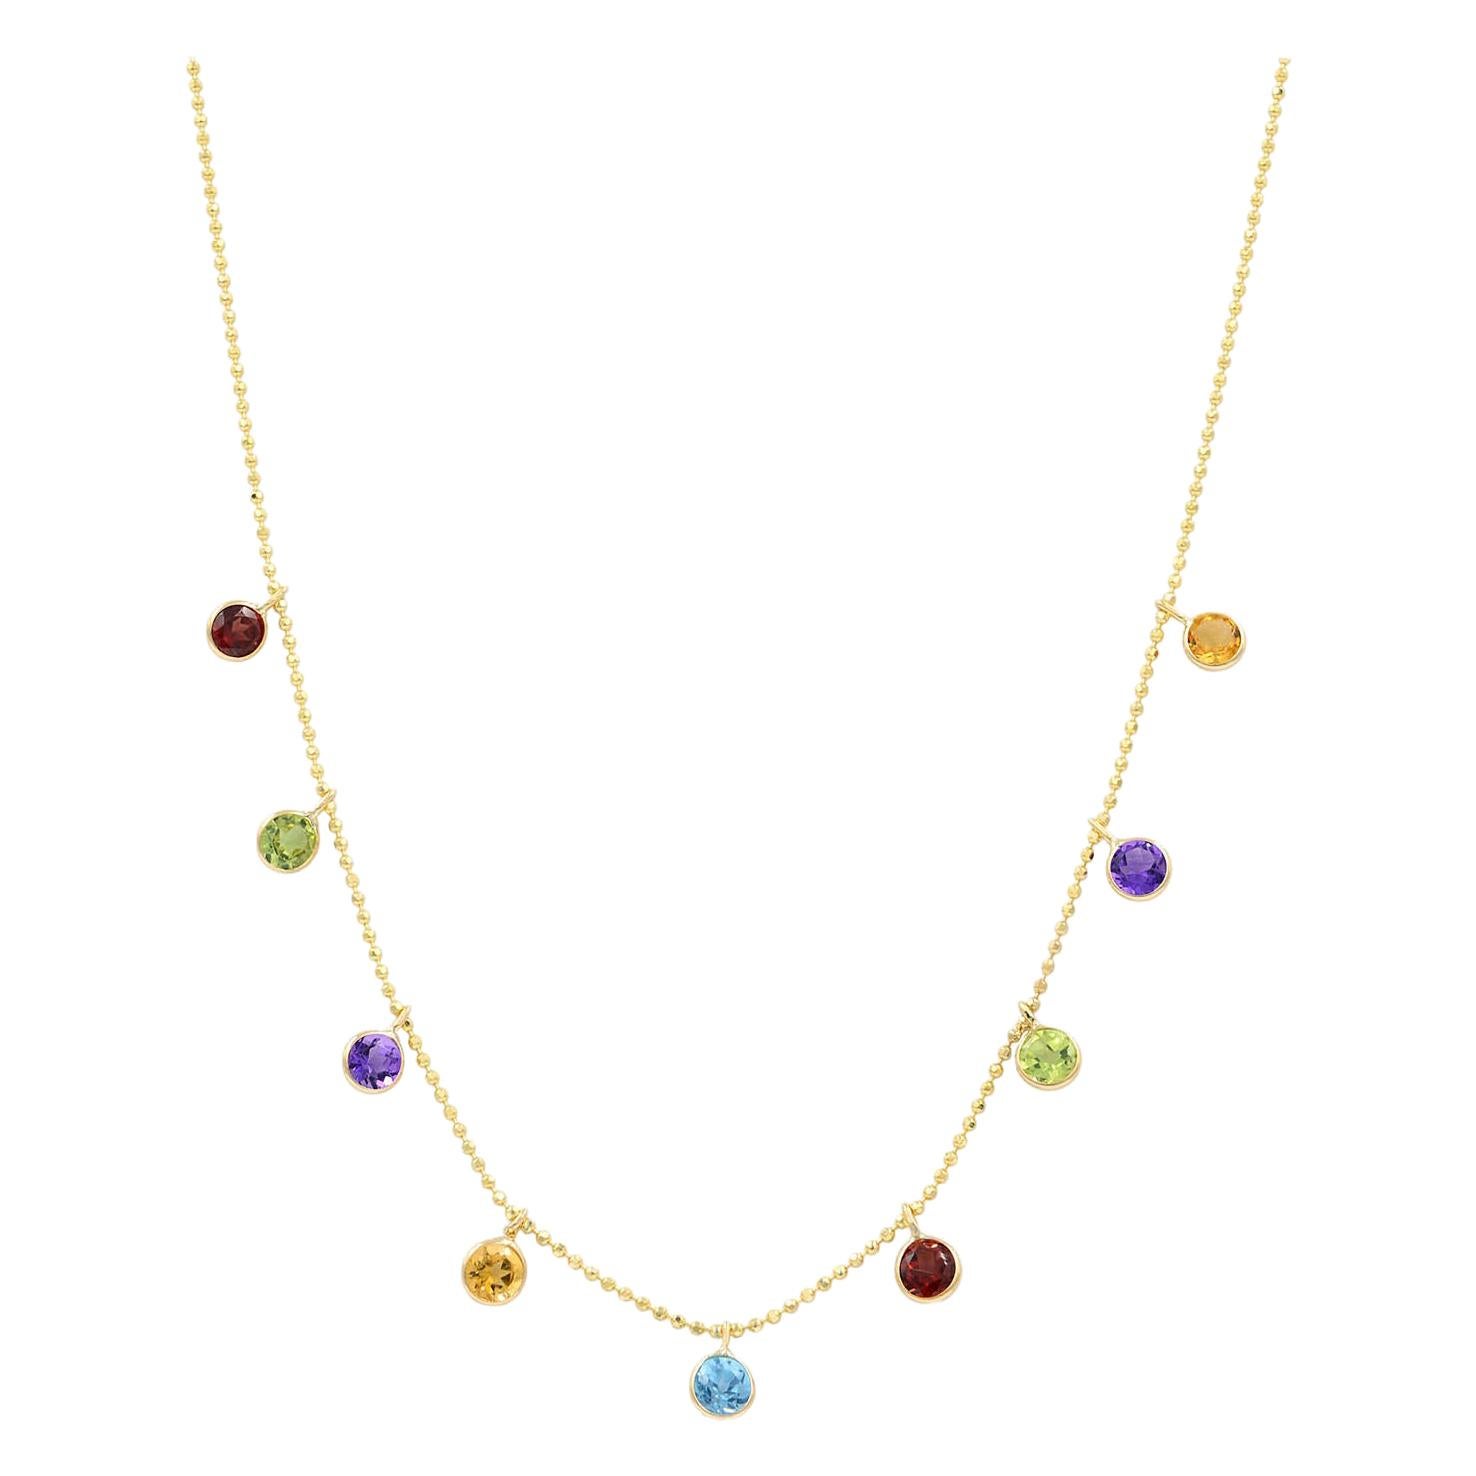 14K Yellow Gold Multi-Color Gemstone Necklace 18 Inches